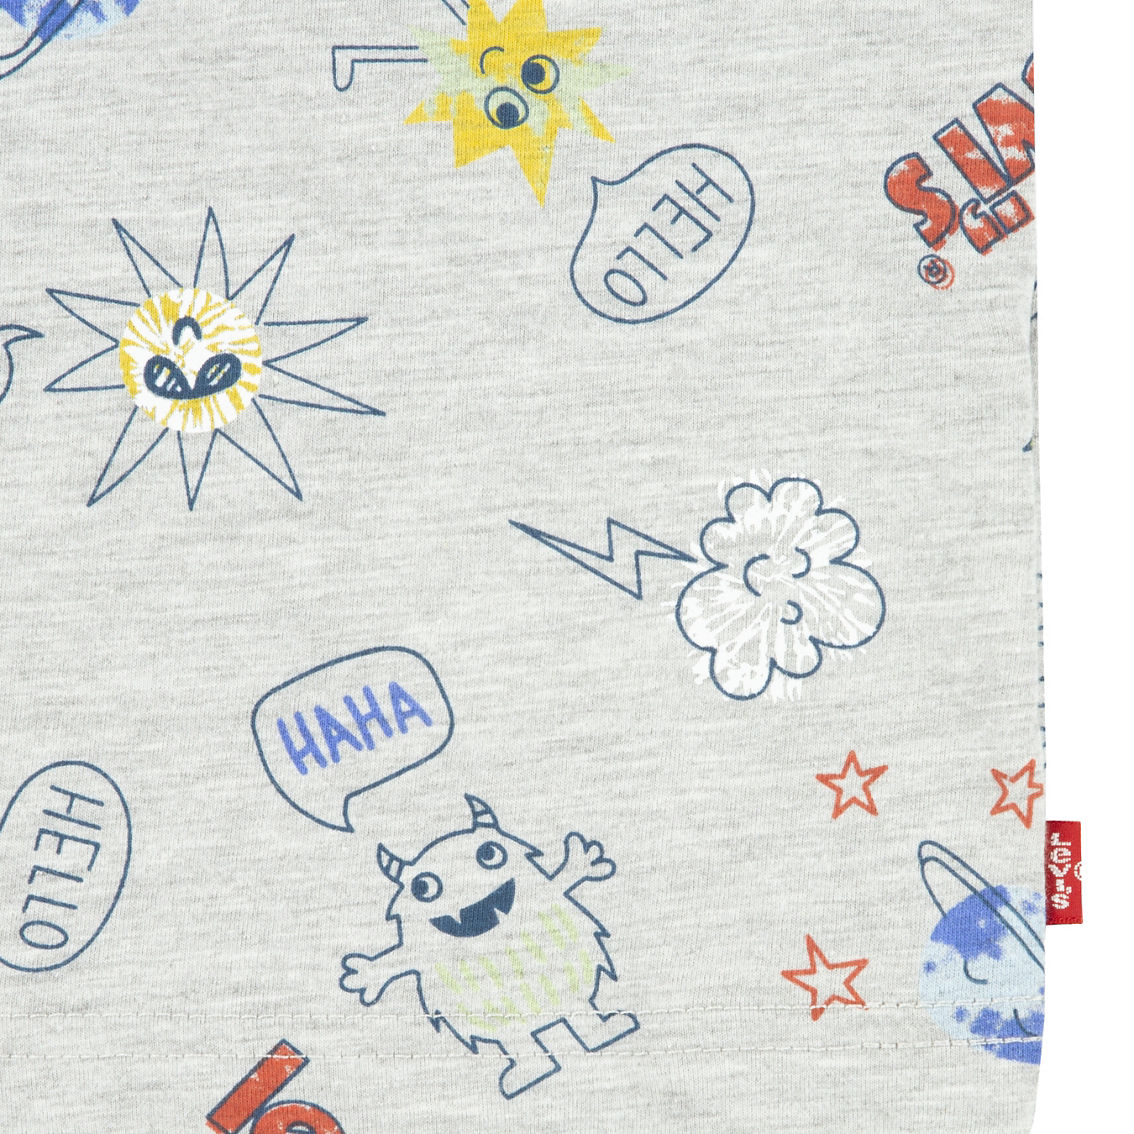 Levi's Little Boys Monster Doodle Tee and Shorts 2 pc. Set - Image 3 of 3